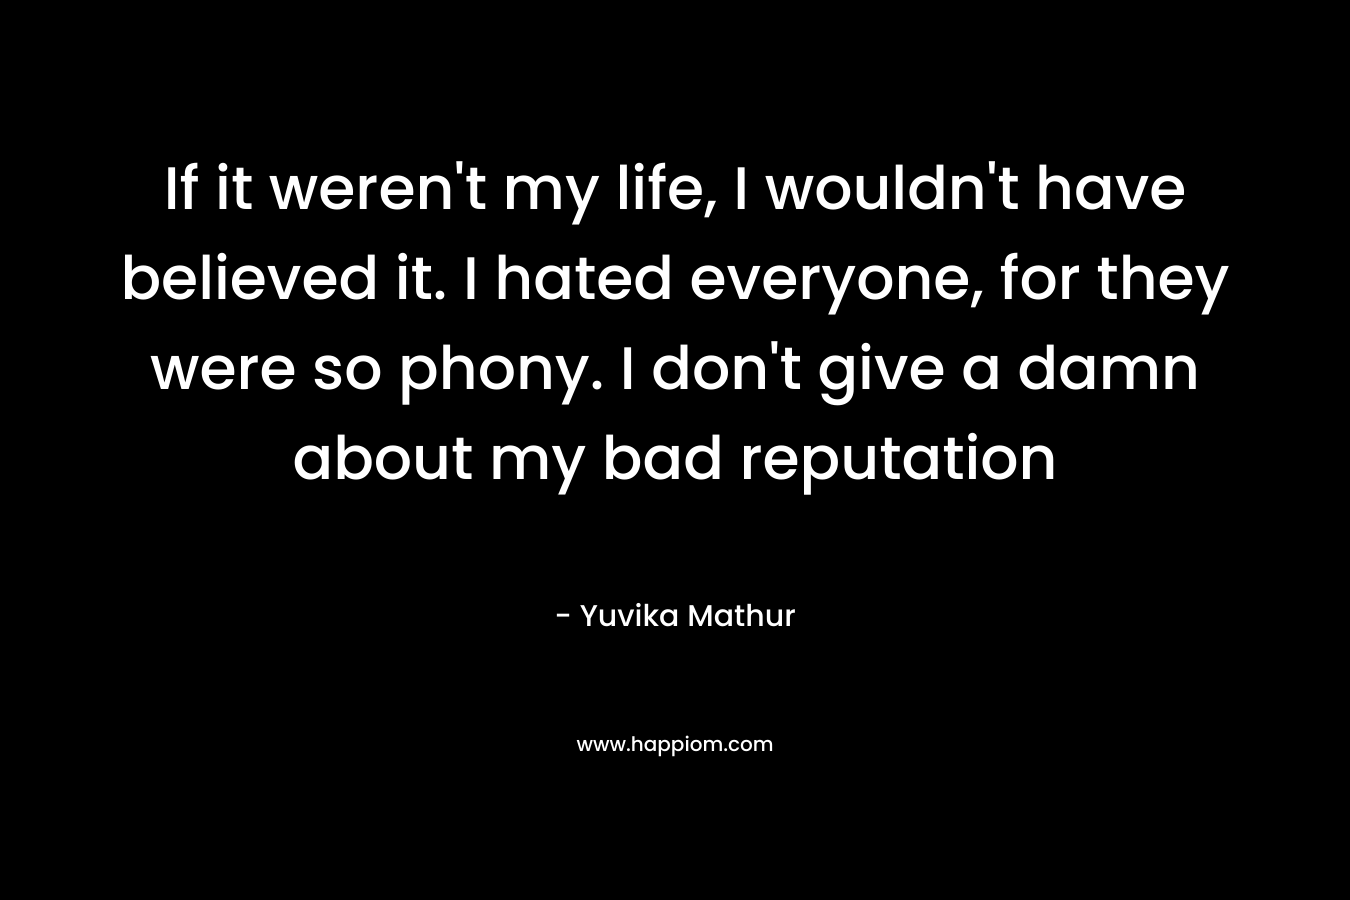 If it weren’t my life, I wouldn’t have believed it. I hated everyone, for they were so phony. I don’t give a damn about my bad reputation – Yuvika Mathur